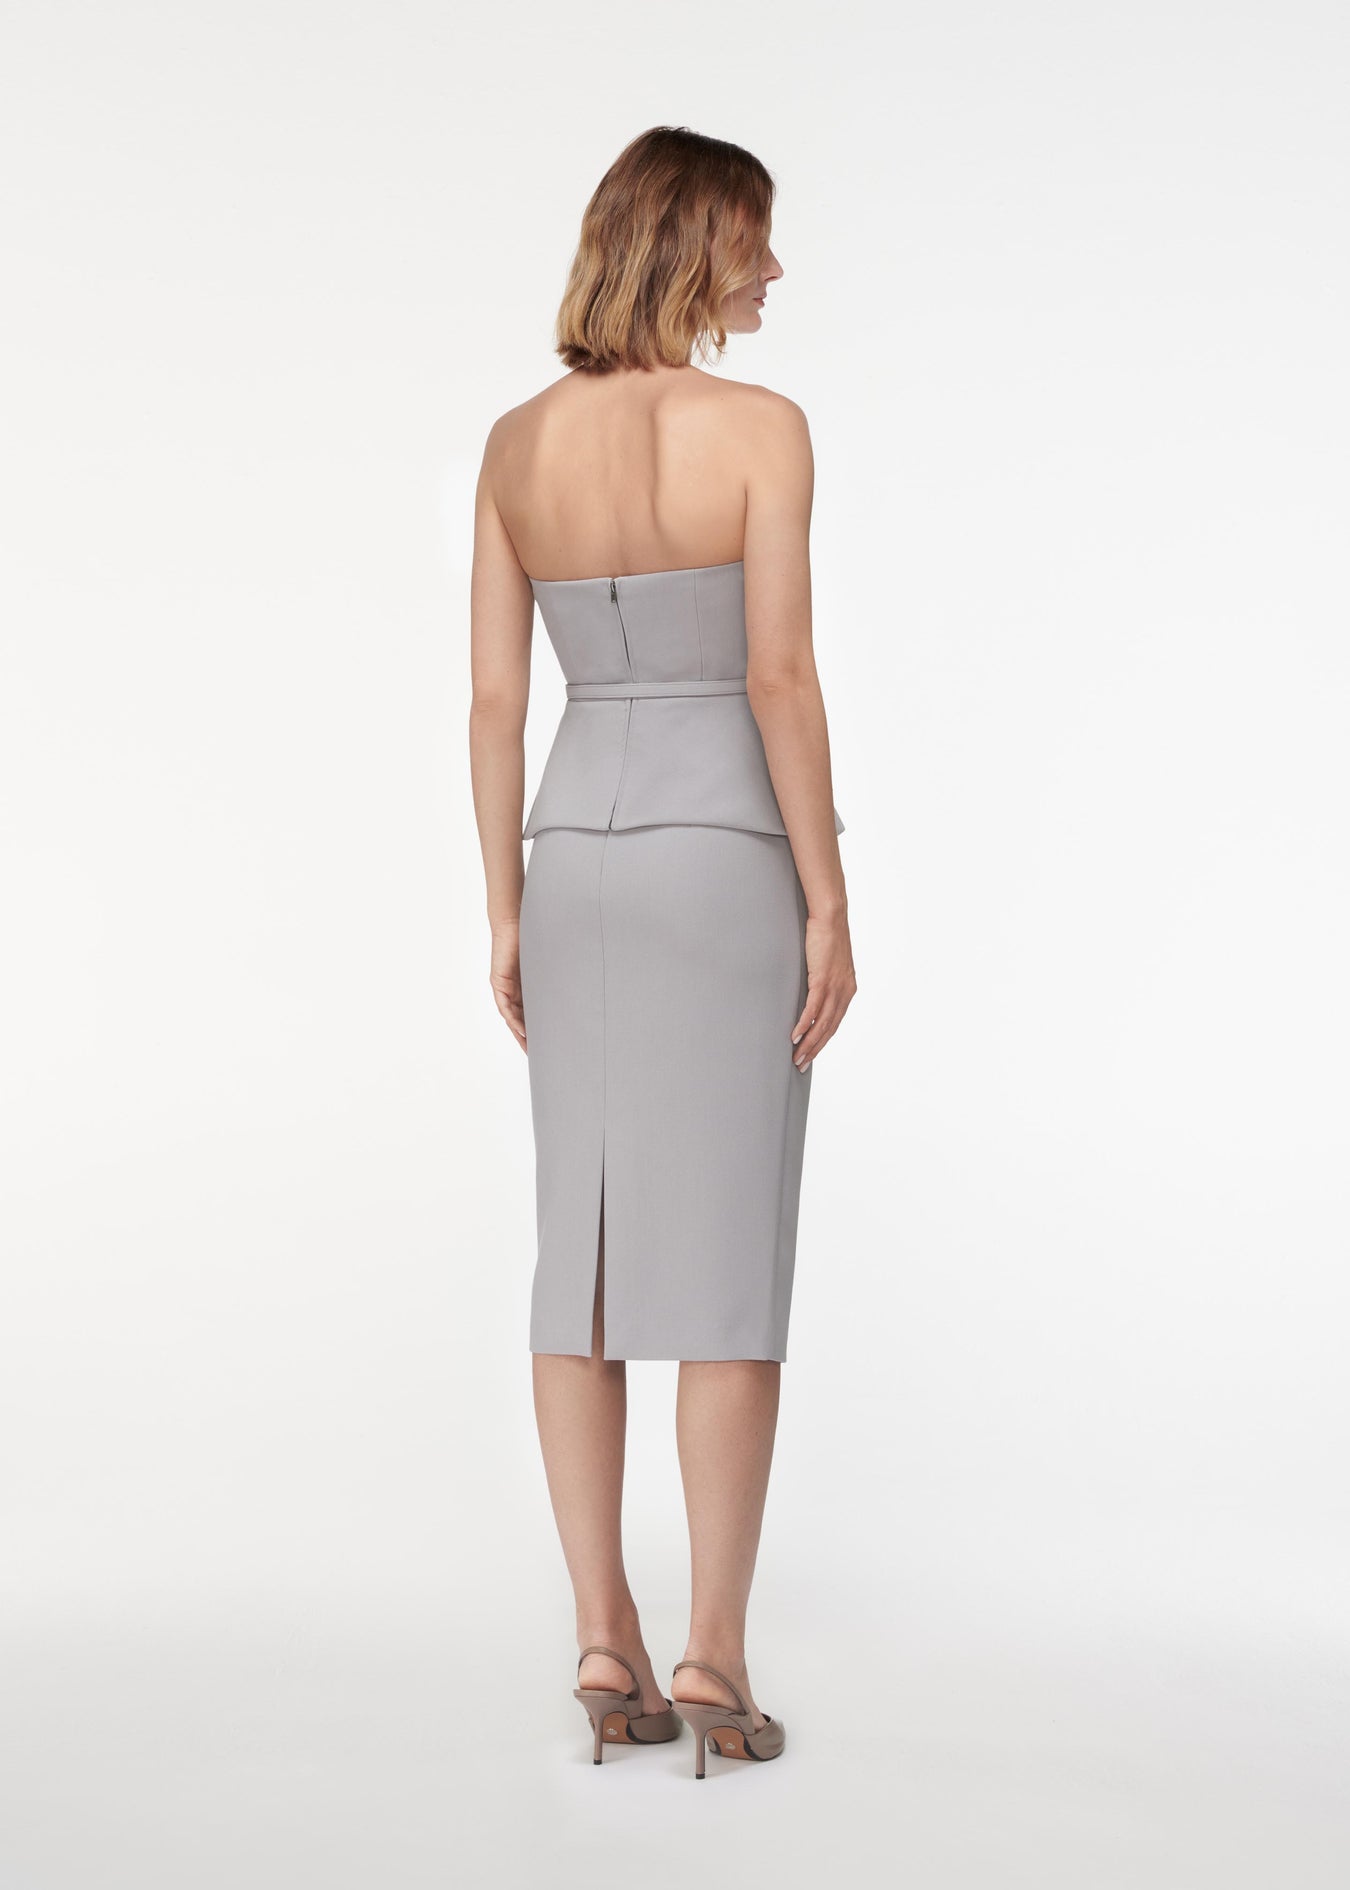 A photograph of a woman wearing a Strapless Crepe Peplum Top in Grey